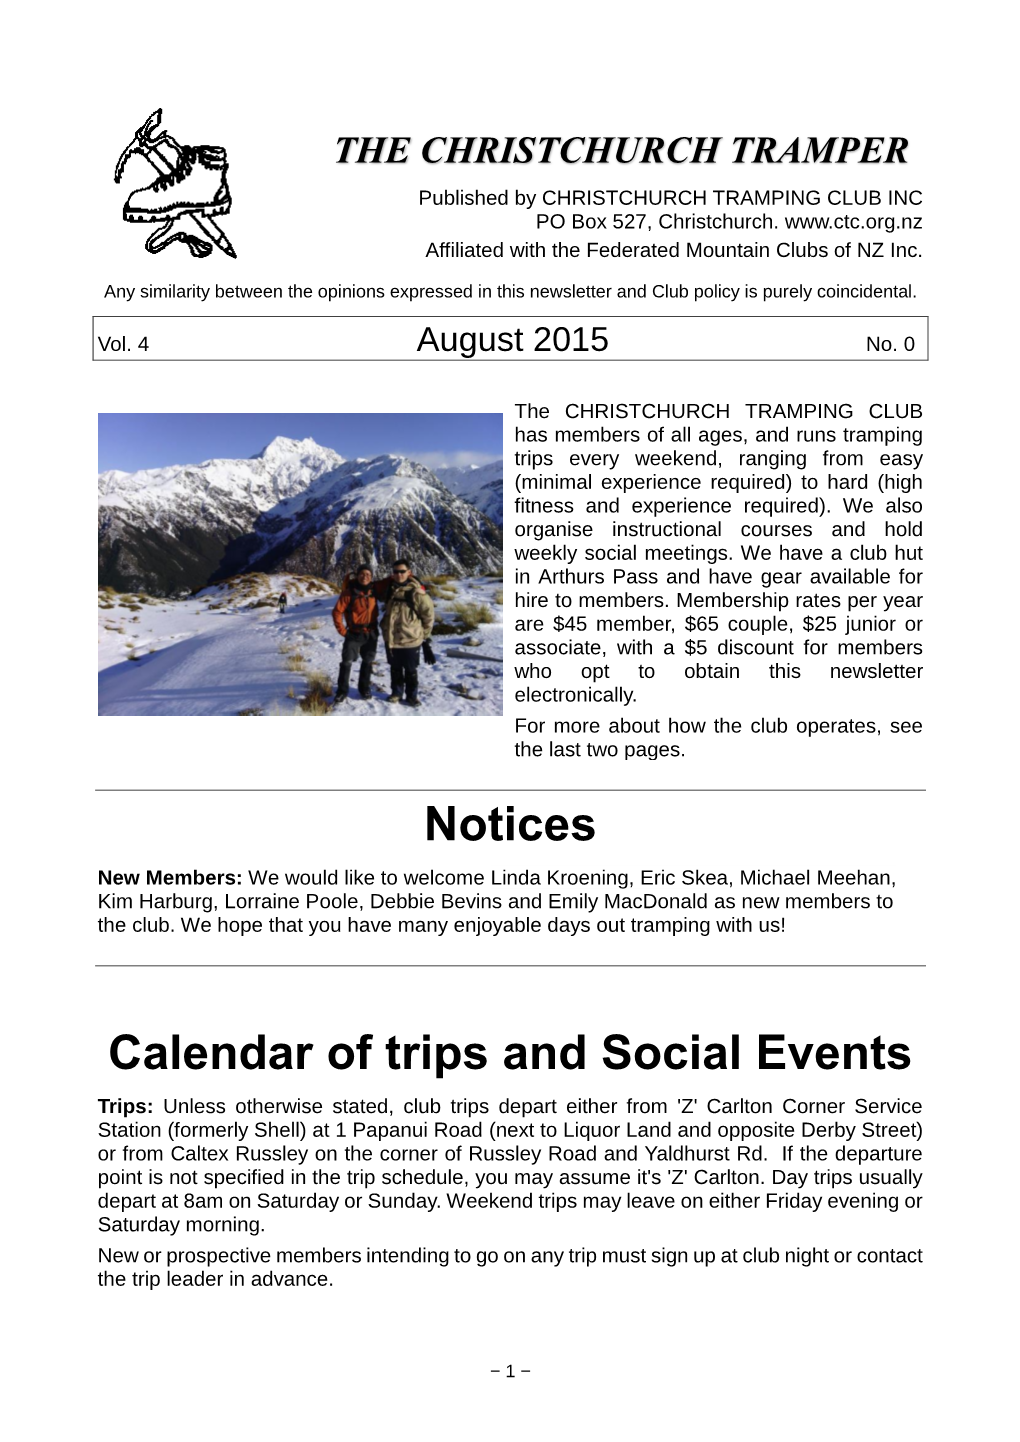 Notices Calendar of Trips and Social Events